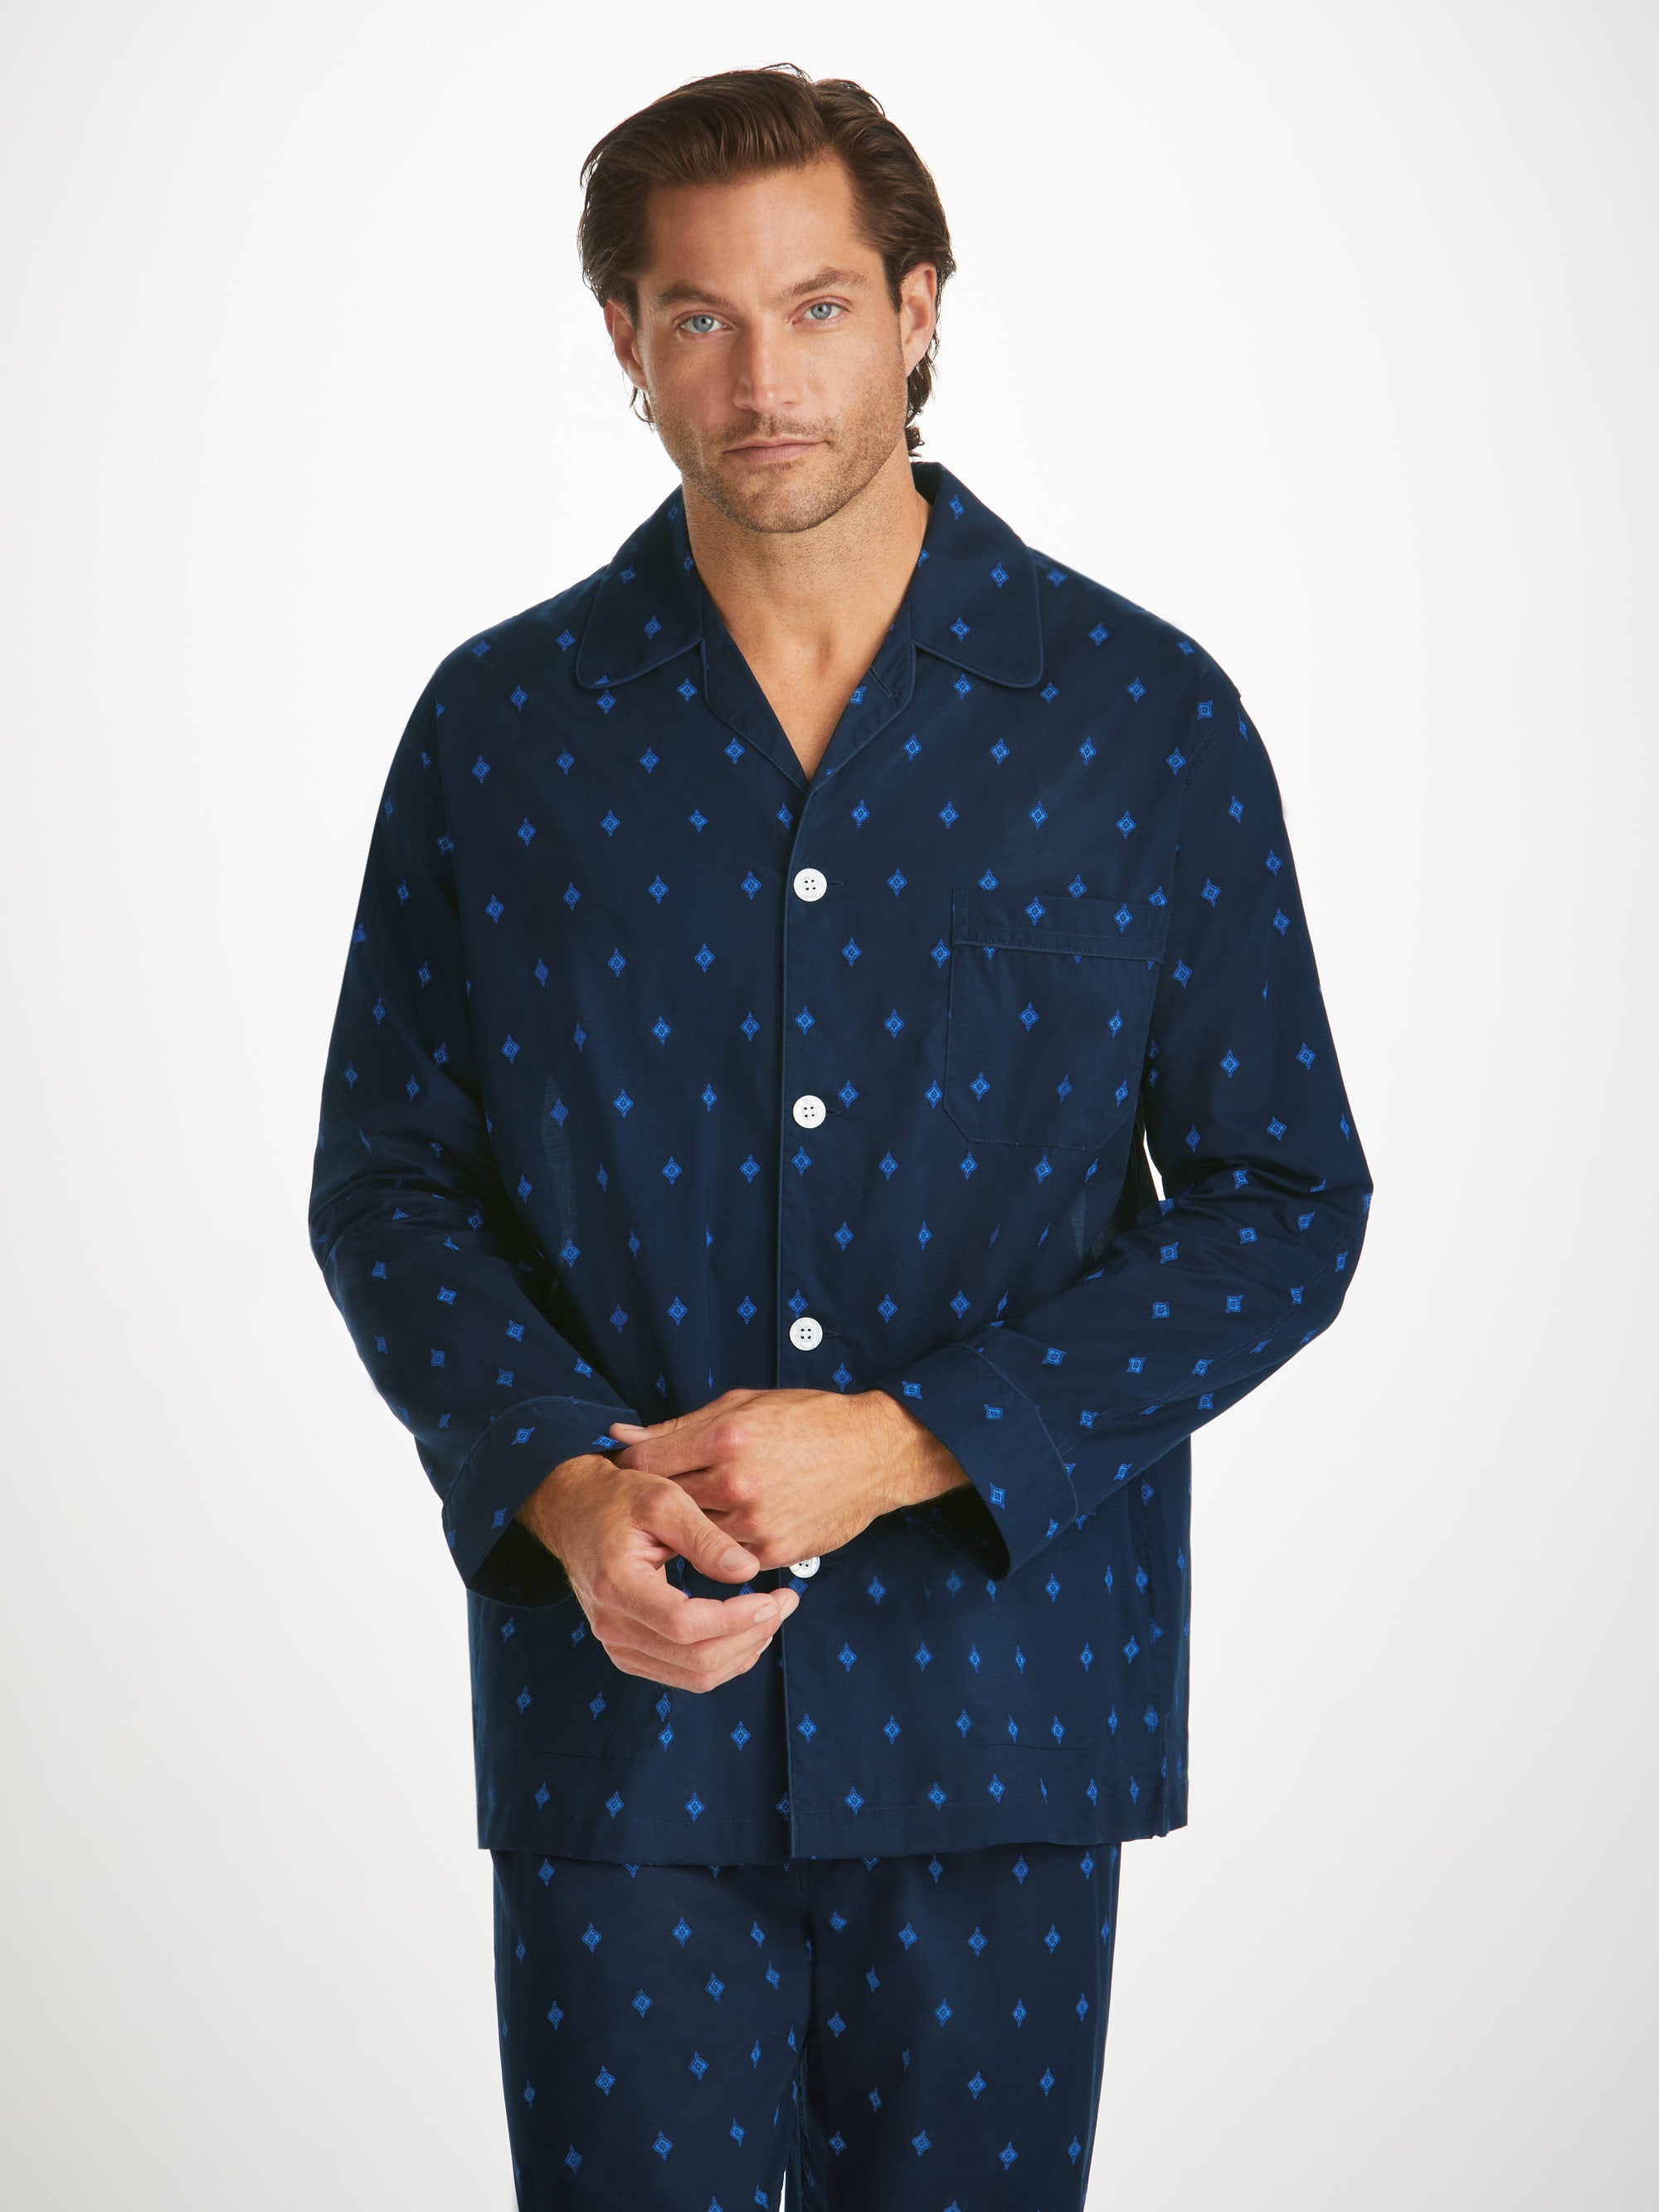 Men's Flannel Pajama Set, 100% Cotton Long Sleeve Sleepwear (Medium, Blue  and Brown Striped) at  Men's Clothing store